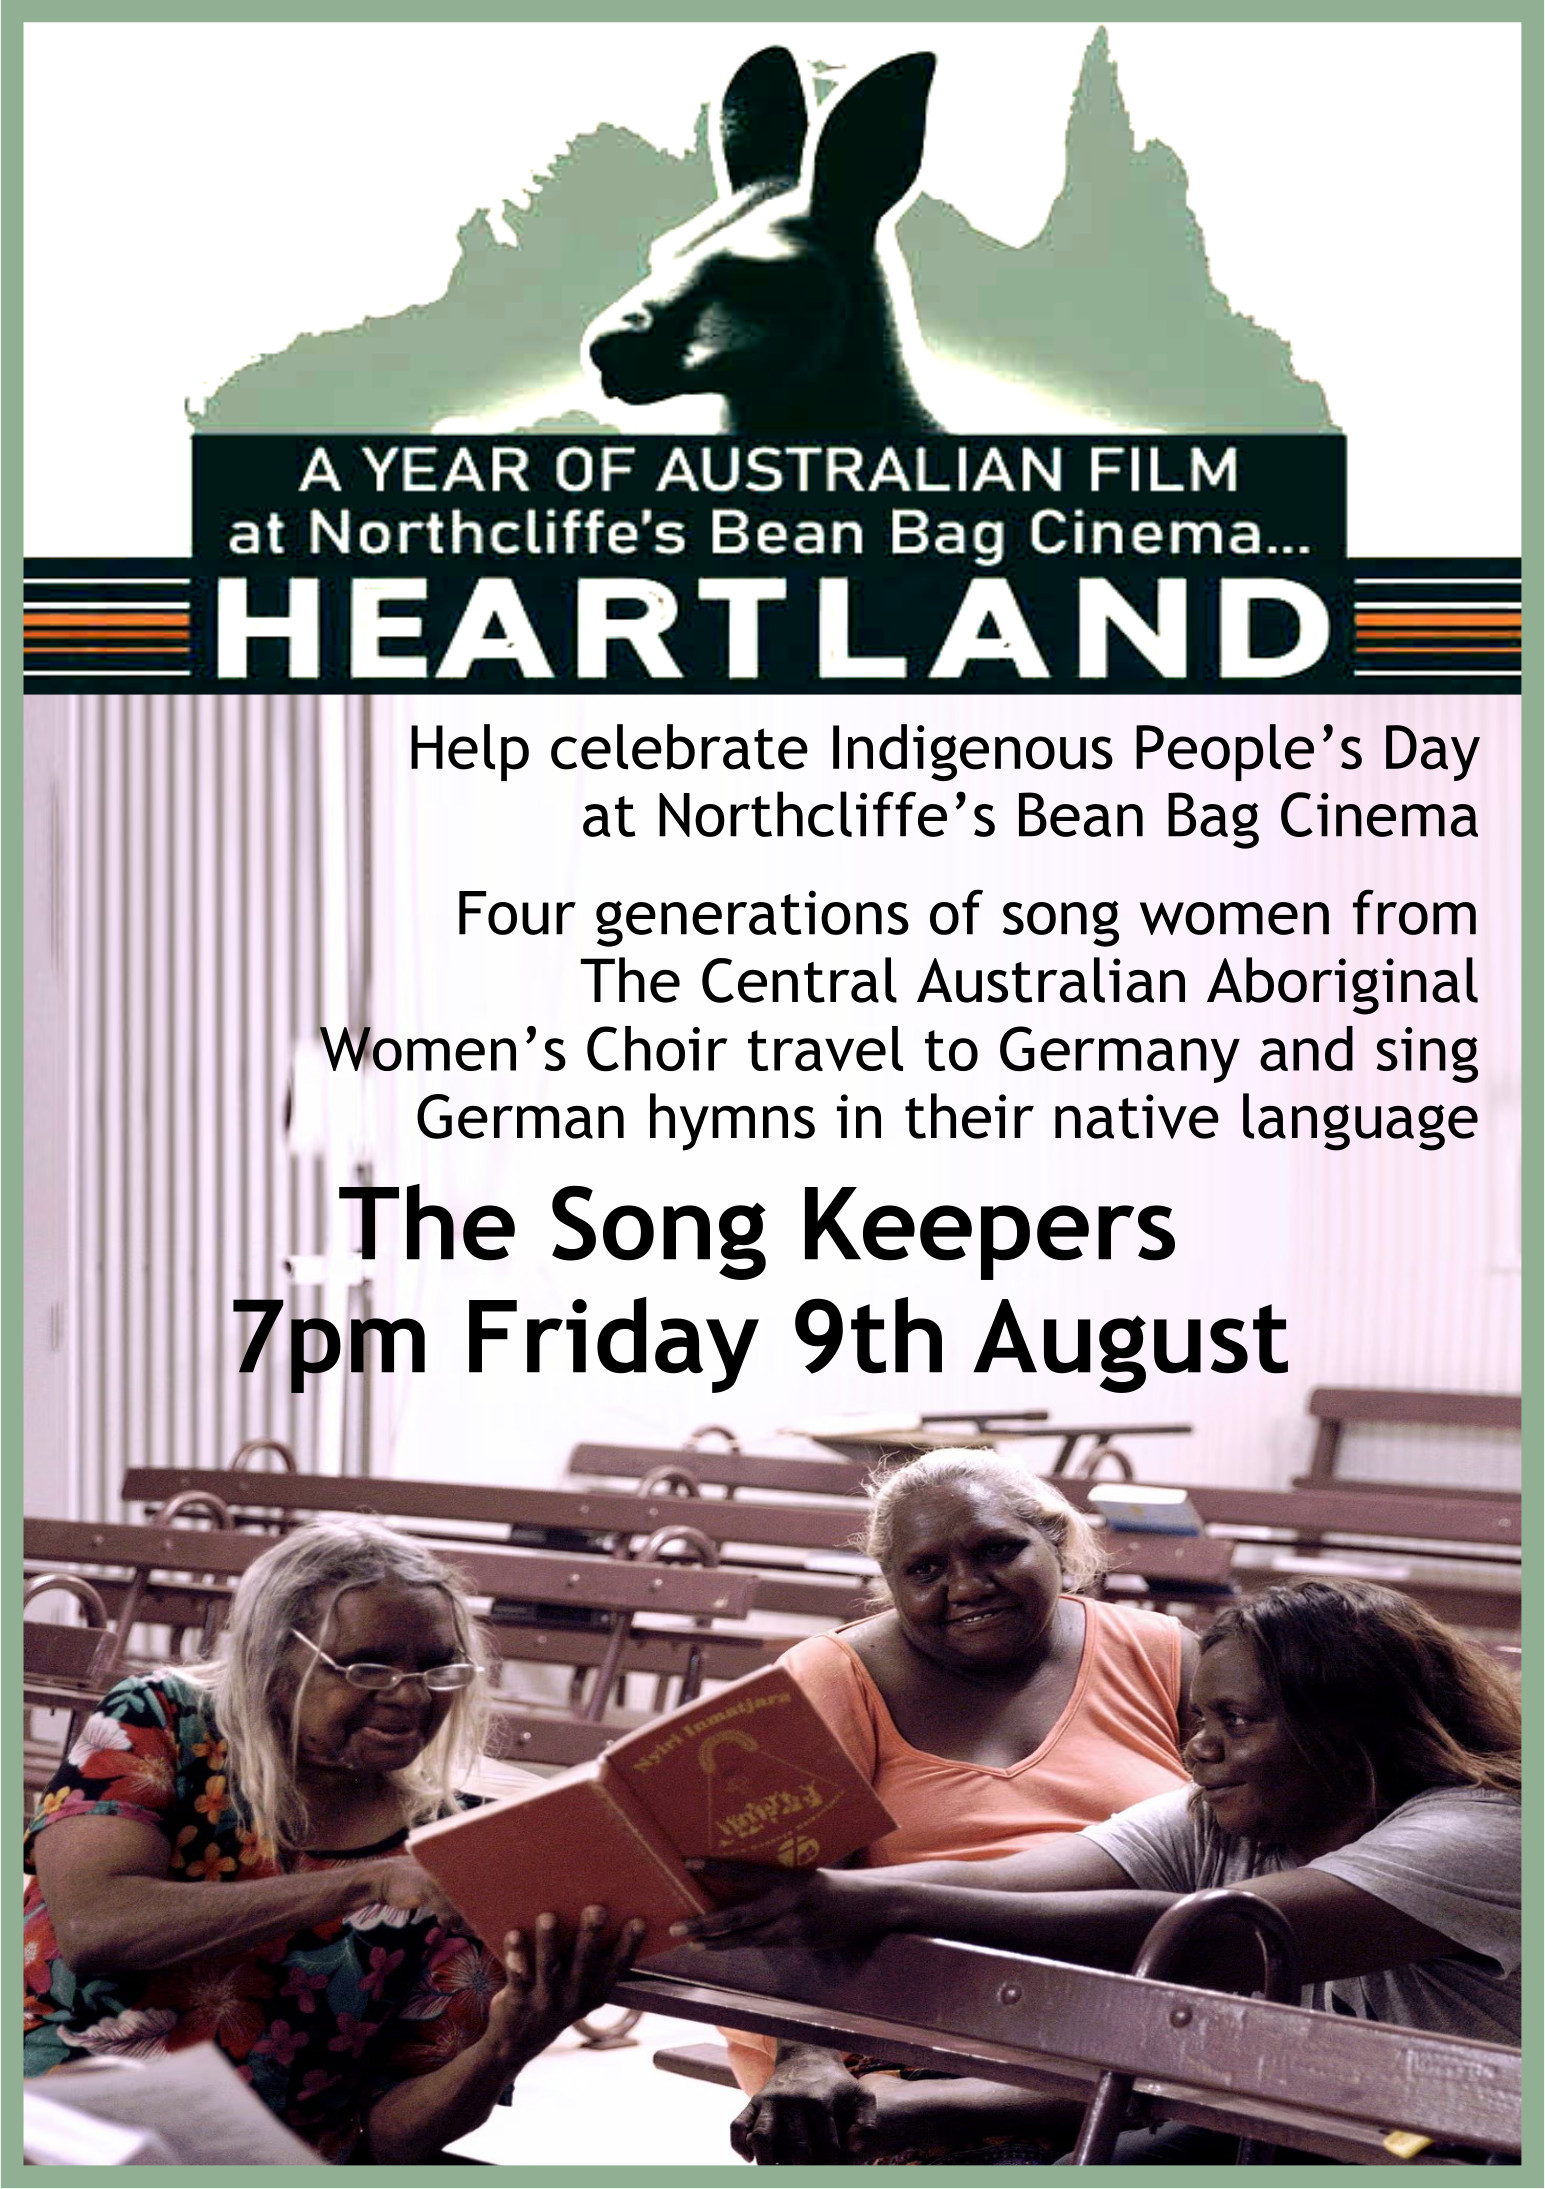 Screening of The Song Keepers 7pm 9th August at Northcliffe's Bean Bag cinema